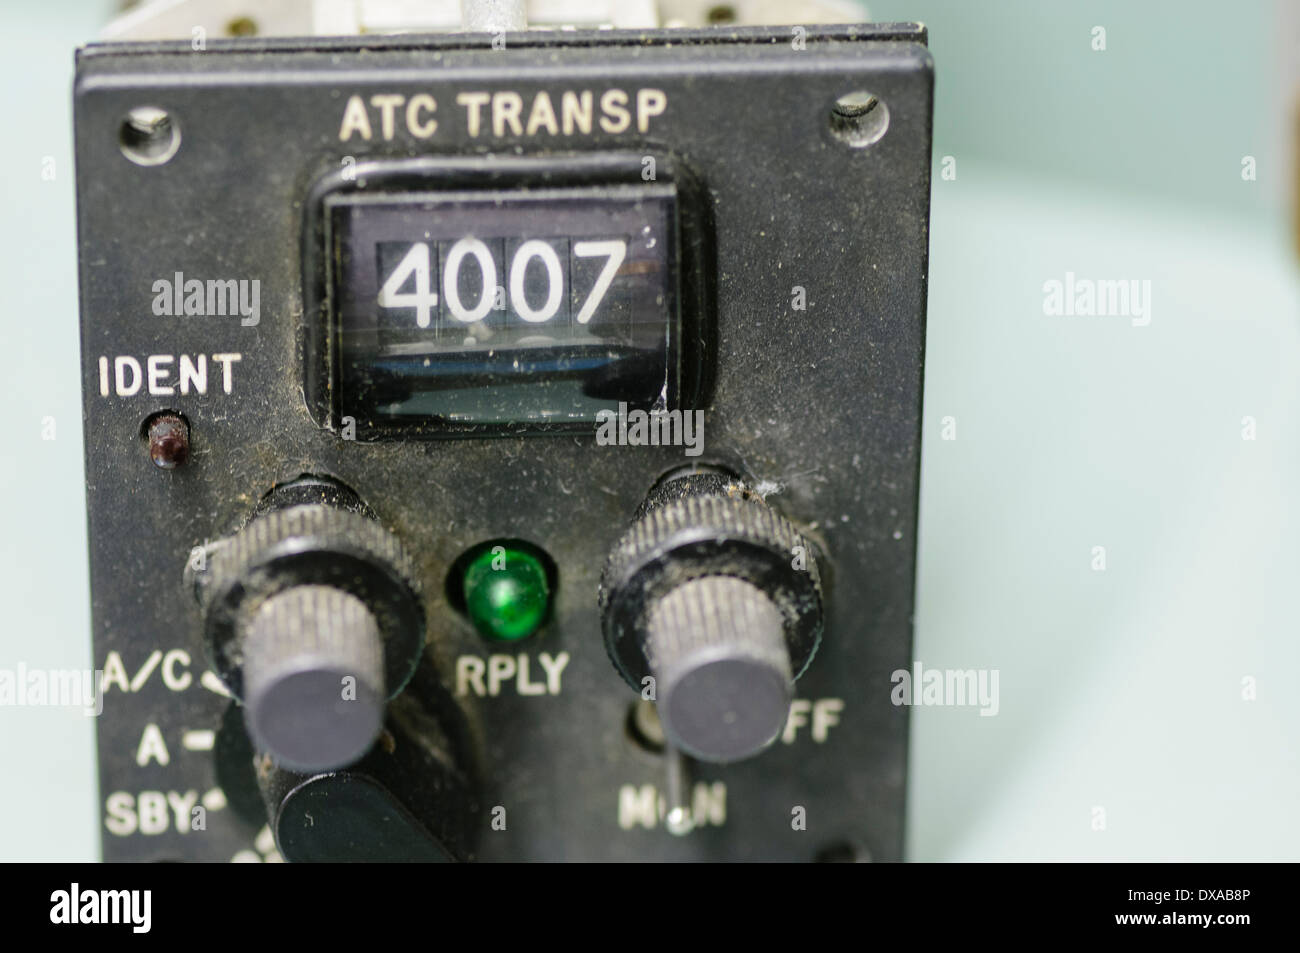 atc-transponder-from-an-aircraft-control-panel-DXAB8P.jpg